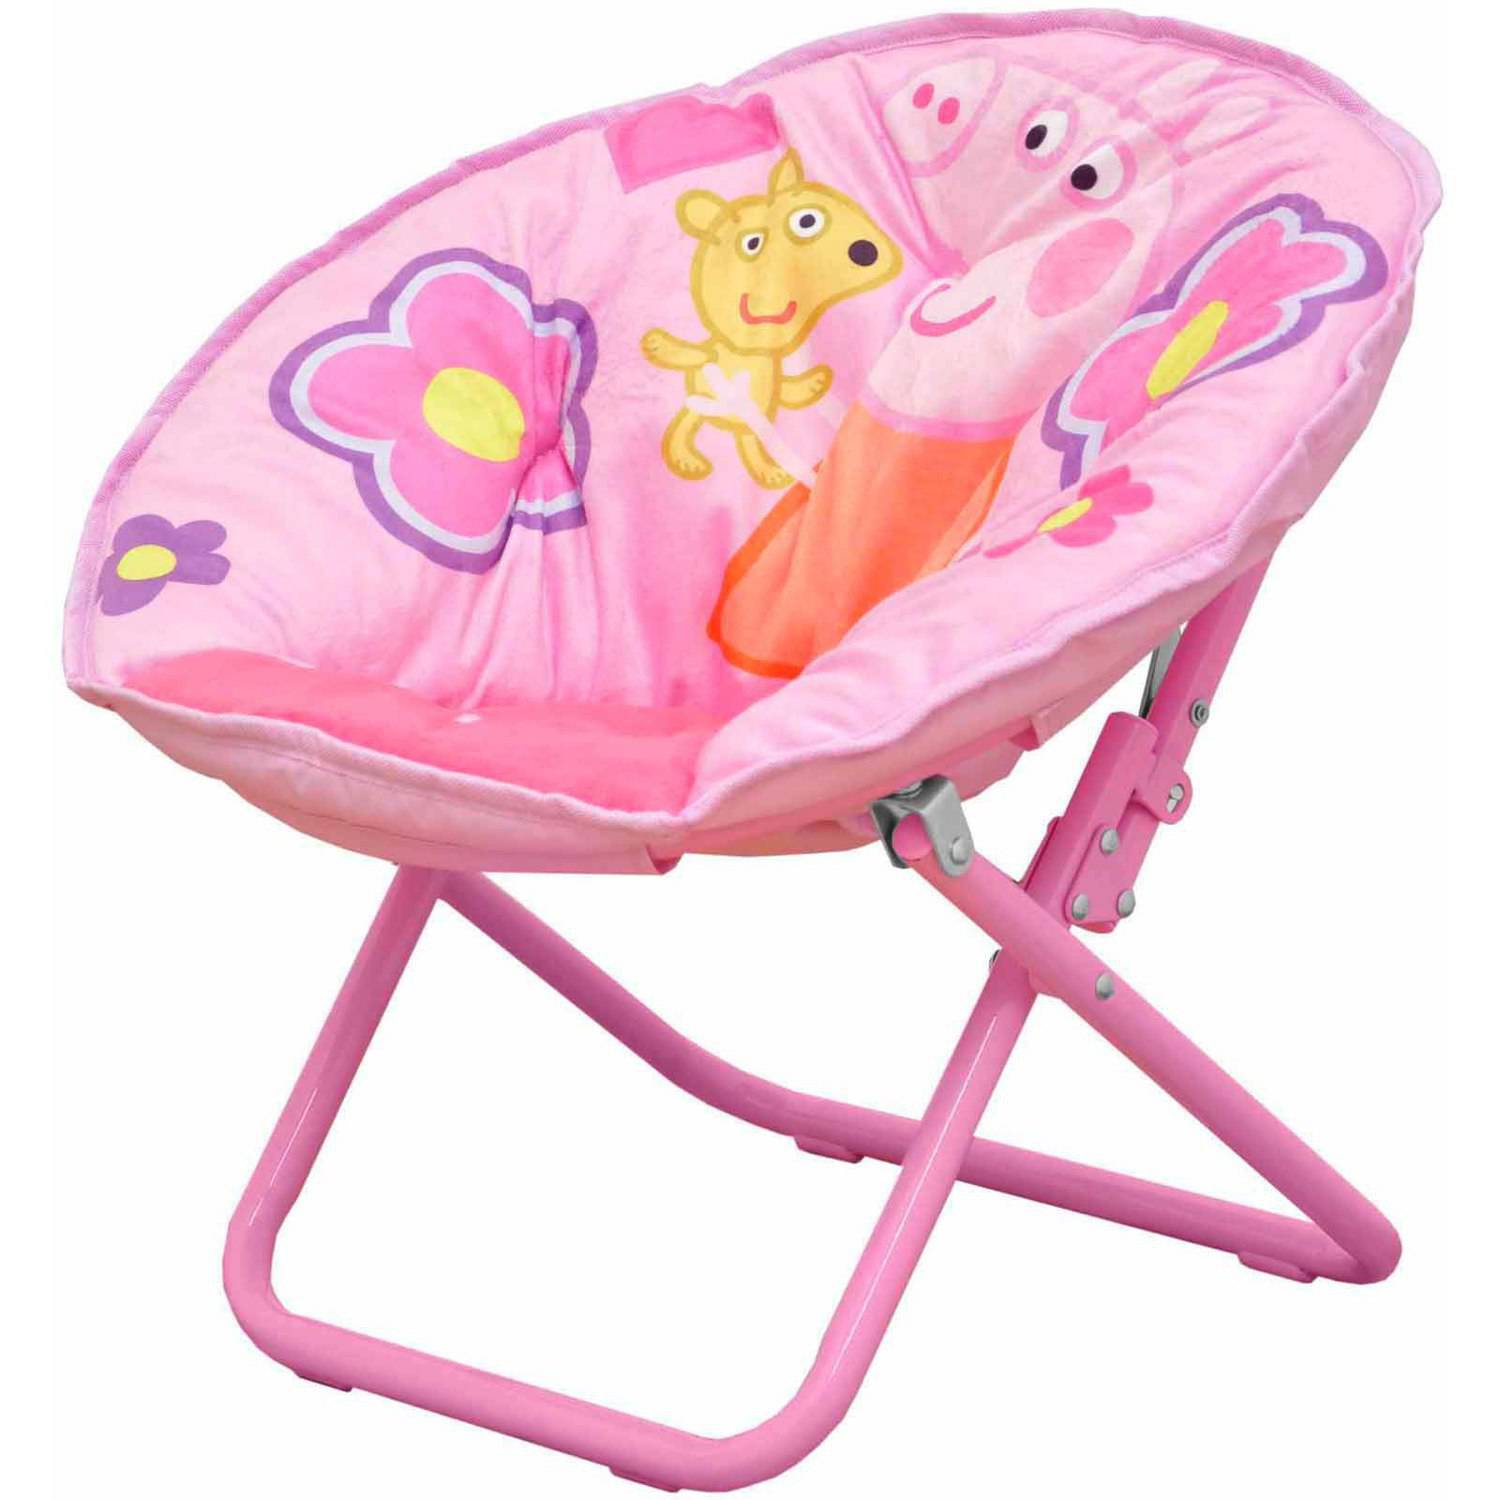 Buy Peppa Pig Collapsible Saucer Chair